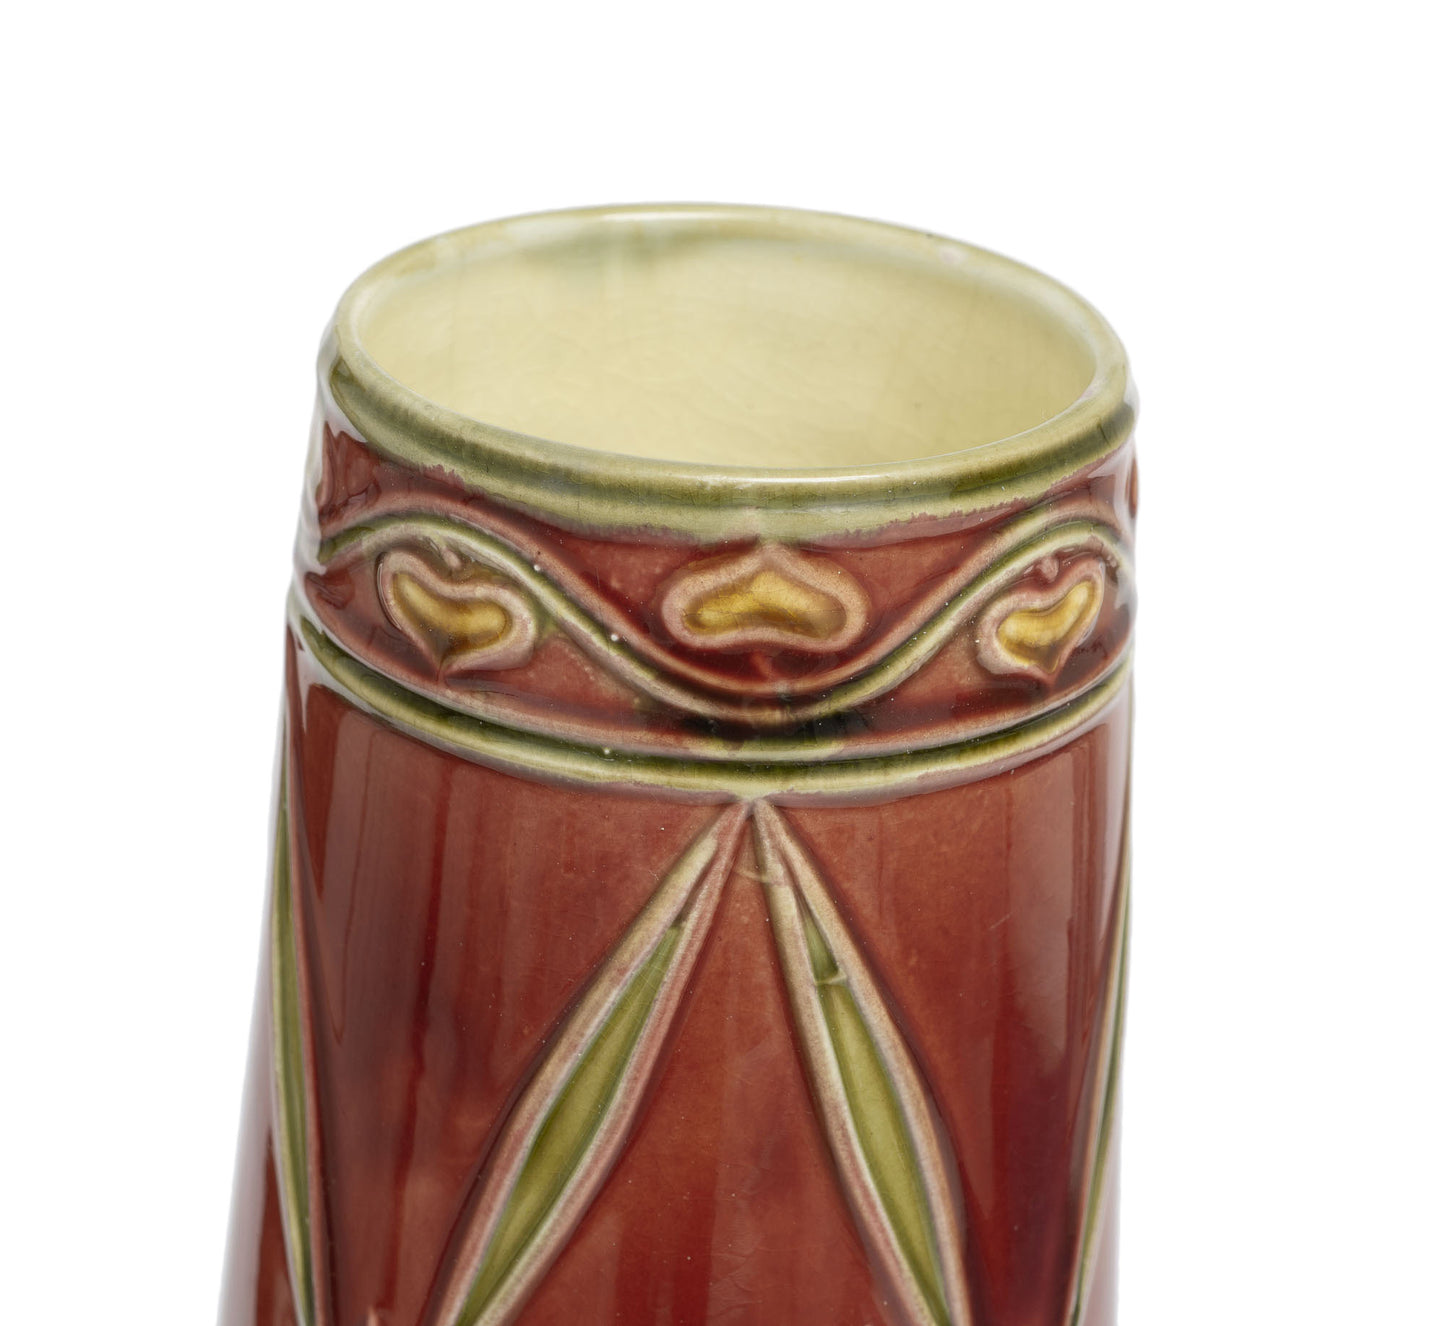 Minton Antique Secessionist Pottery Vase in Red Glaze with Tubelined Body (2917)